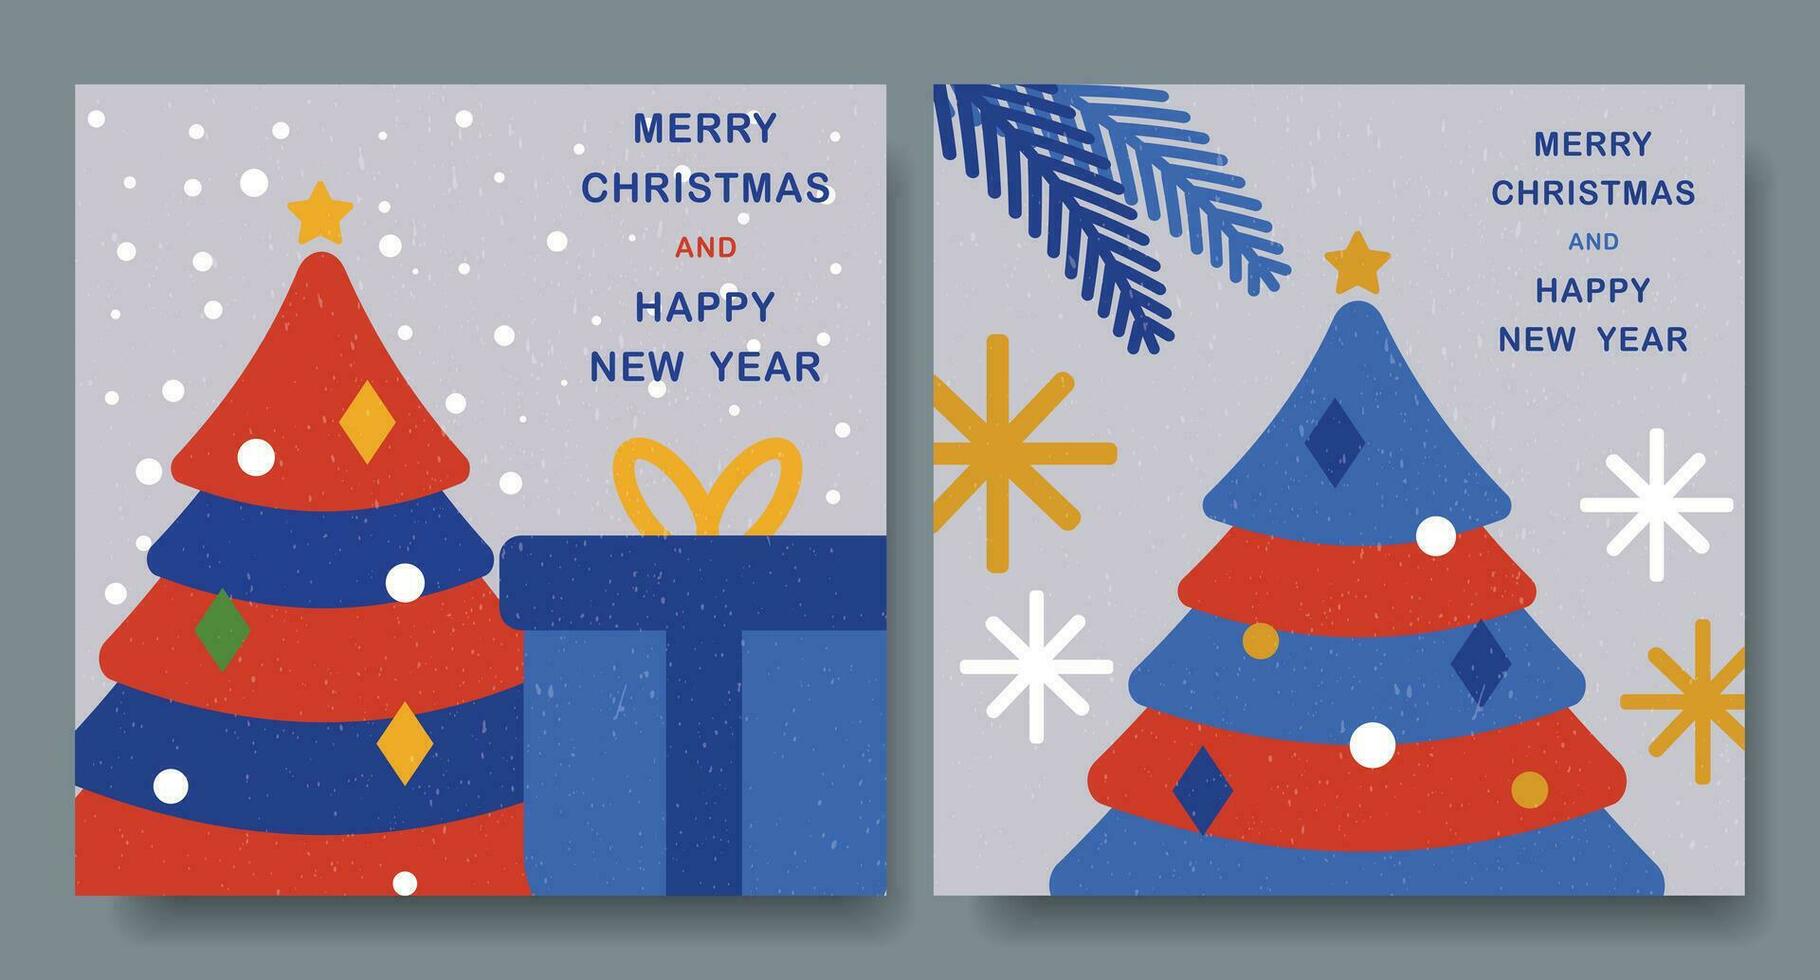 Merry Christmas and Happy New Year, greeting card with a voluminous tree and gifts. The background is blue. vector